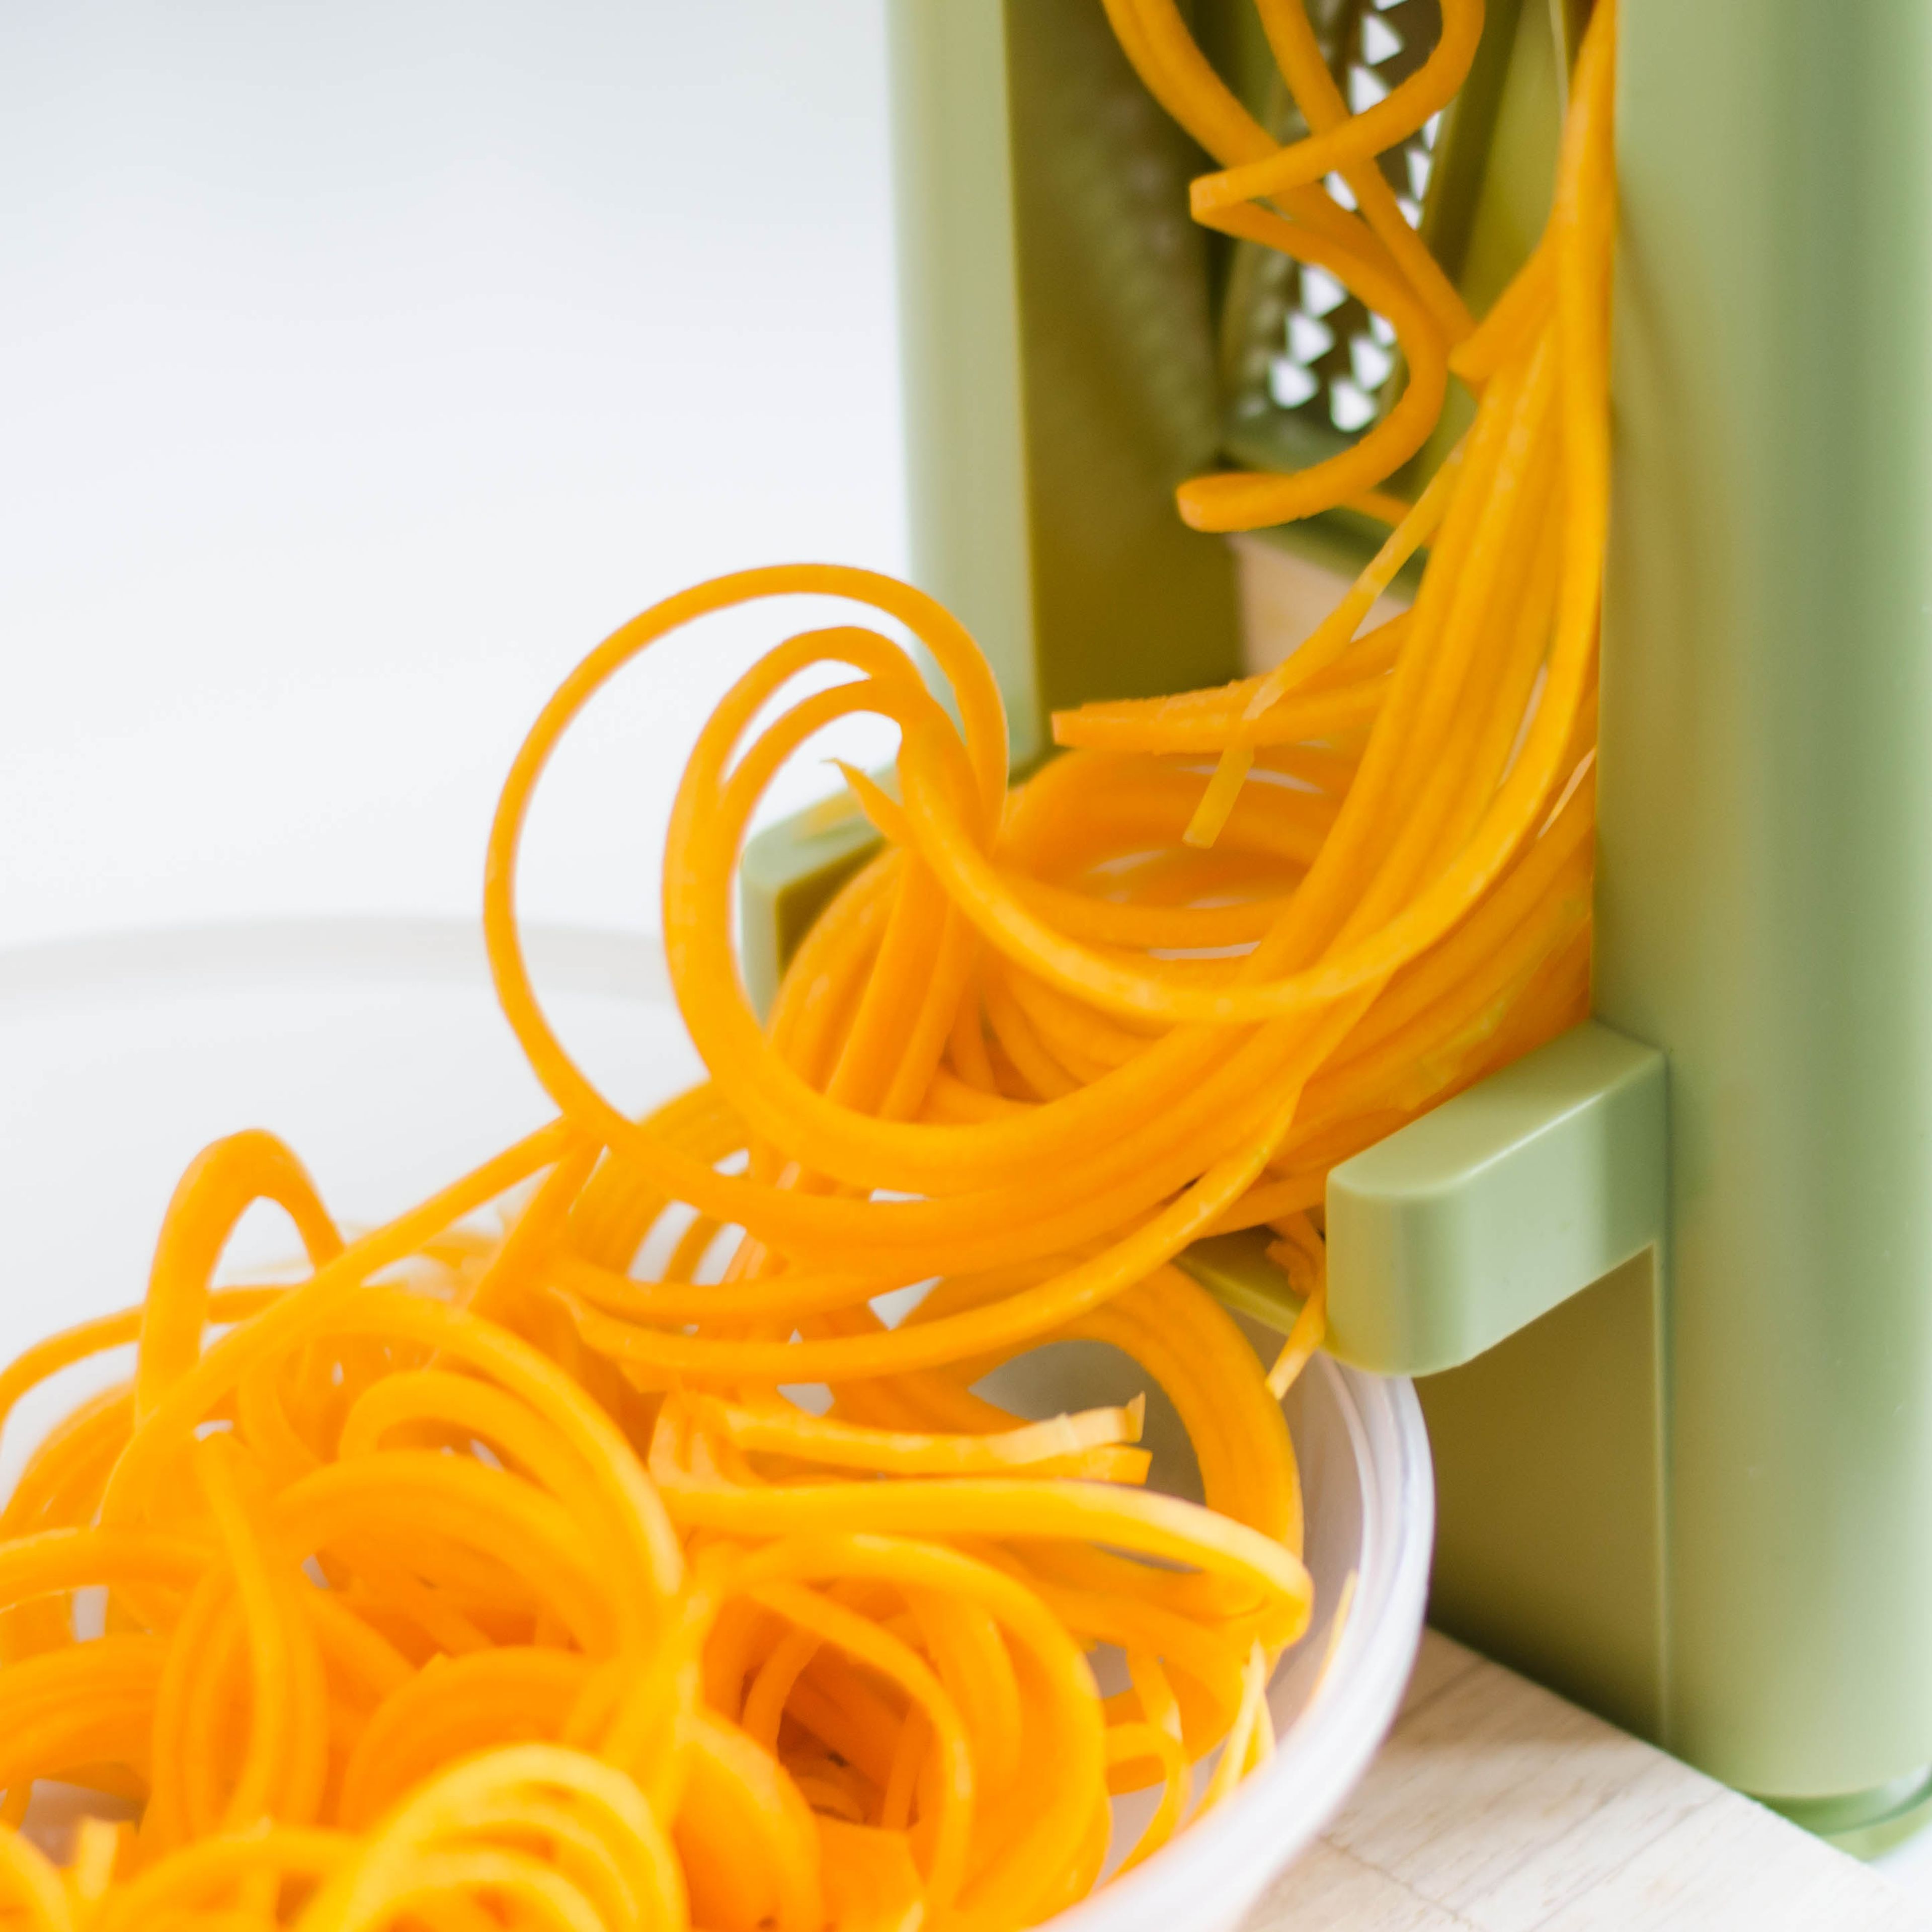 Cut off the head of the butternut squash and peel. Cut squash into spaghetti using a vegetable spiralizer. Add quinoa to a sieve and rinse under cold water. Then transfer to a pot with water, bring to a boil, and cook for approx. 15 min. Meanwhile wash leek and finely cut into rings. Mince garlic and slice chili. Set aside.